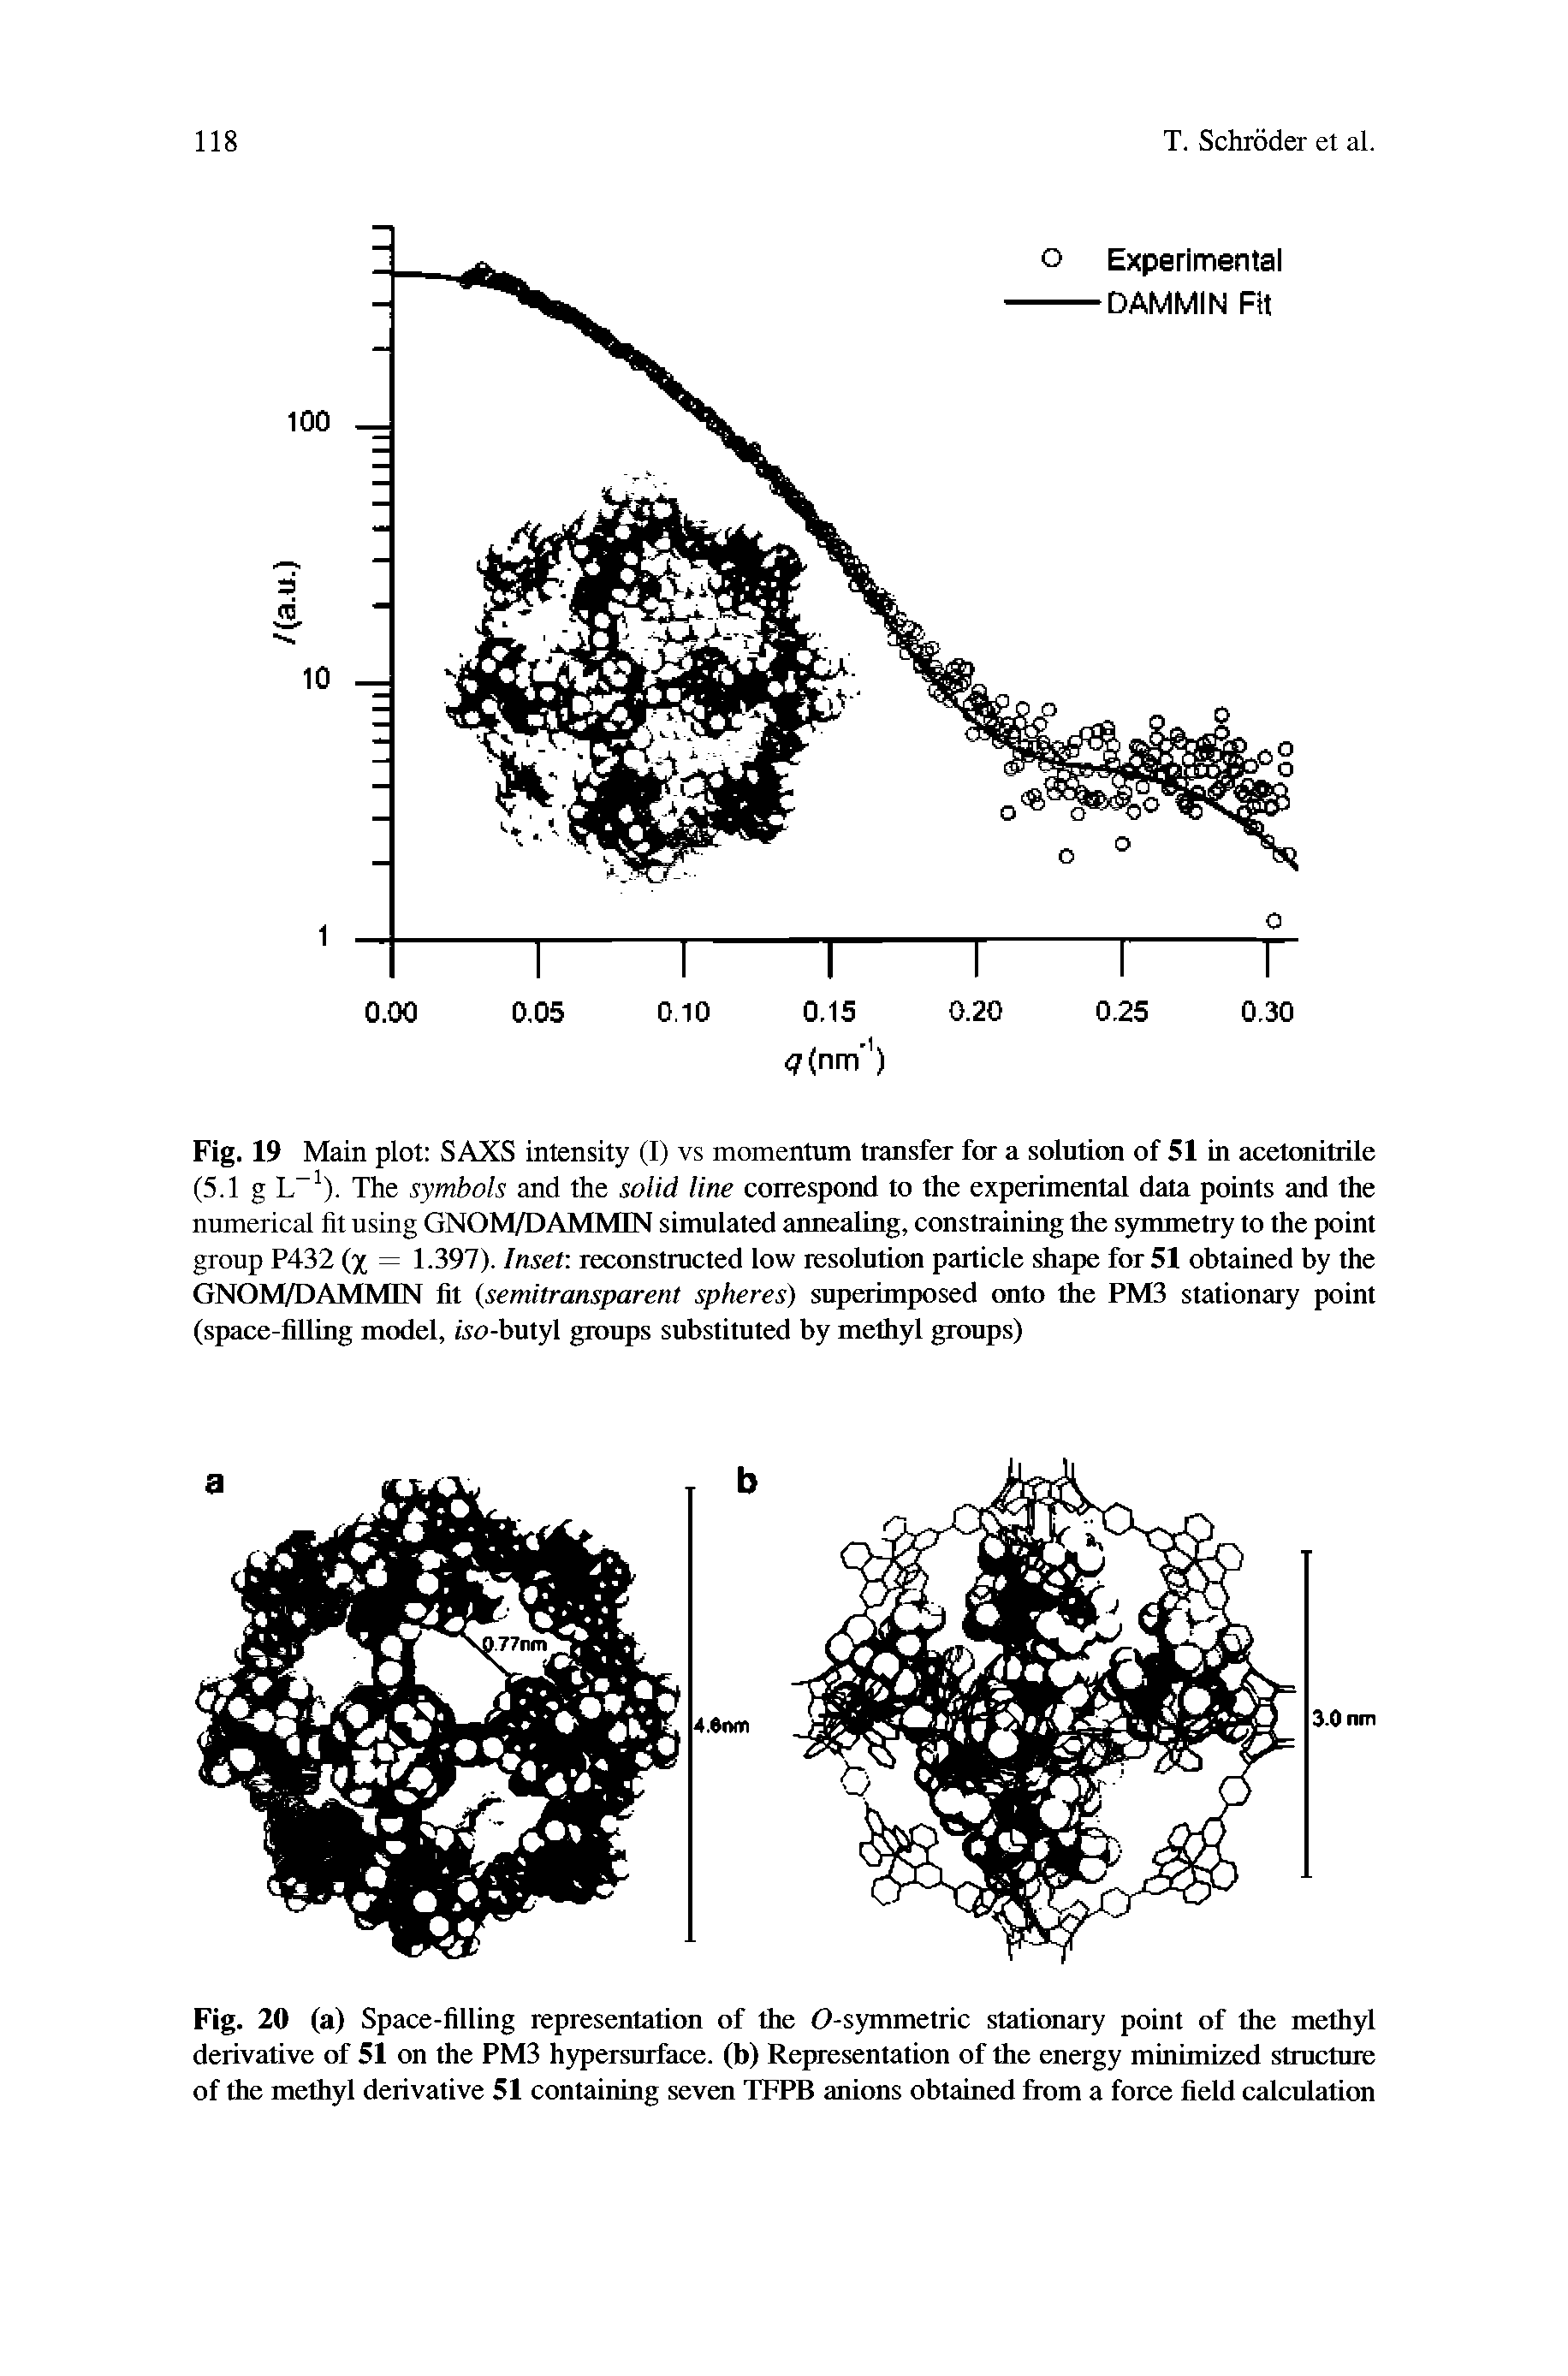 Fig. 19 Main plot SAXS intensity (I) vs momentum transfer for a solution of 51 in acetonitrile (5.1 g L 1). The symbols and the solid line correspond to the experimental data points and the numerical fit using GNOM/DAMMIN simulated annealing, constraining the symmetry to the point group P432 (% = 1.397). Inset reconstructed low resolution particle shape for 51 obtained by the GNOM/DAMMIN fit (semitransparent spheres) superimposed onto the PM3 stationary point (space-filling model, iso-butyl groups substituted by methyl groups)...